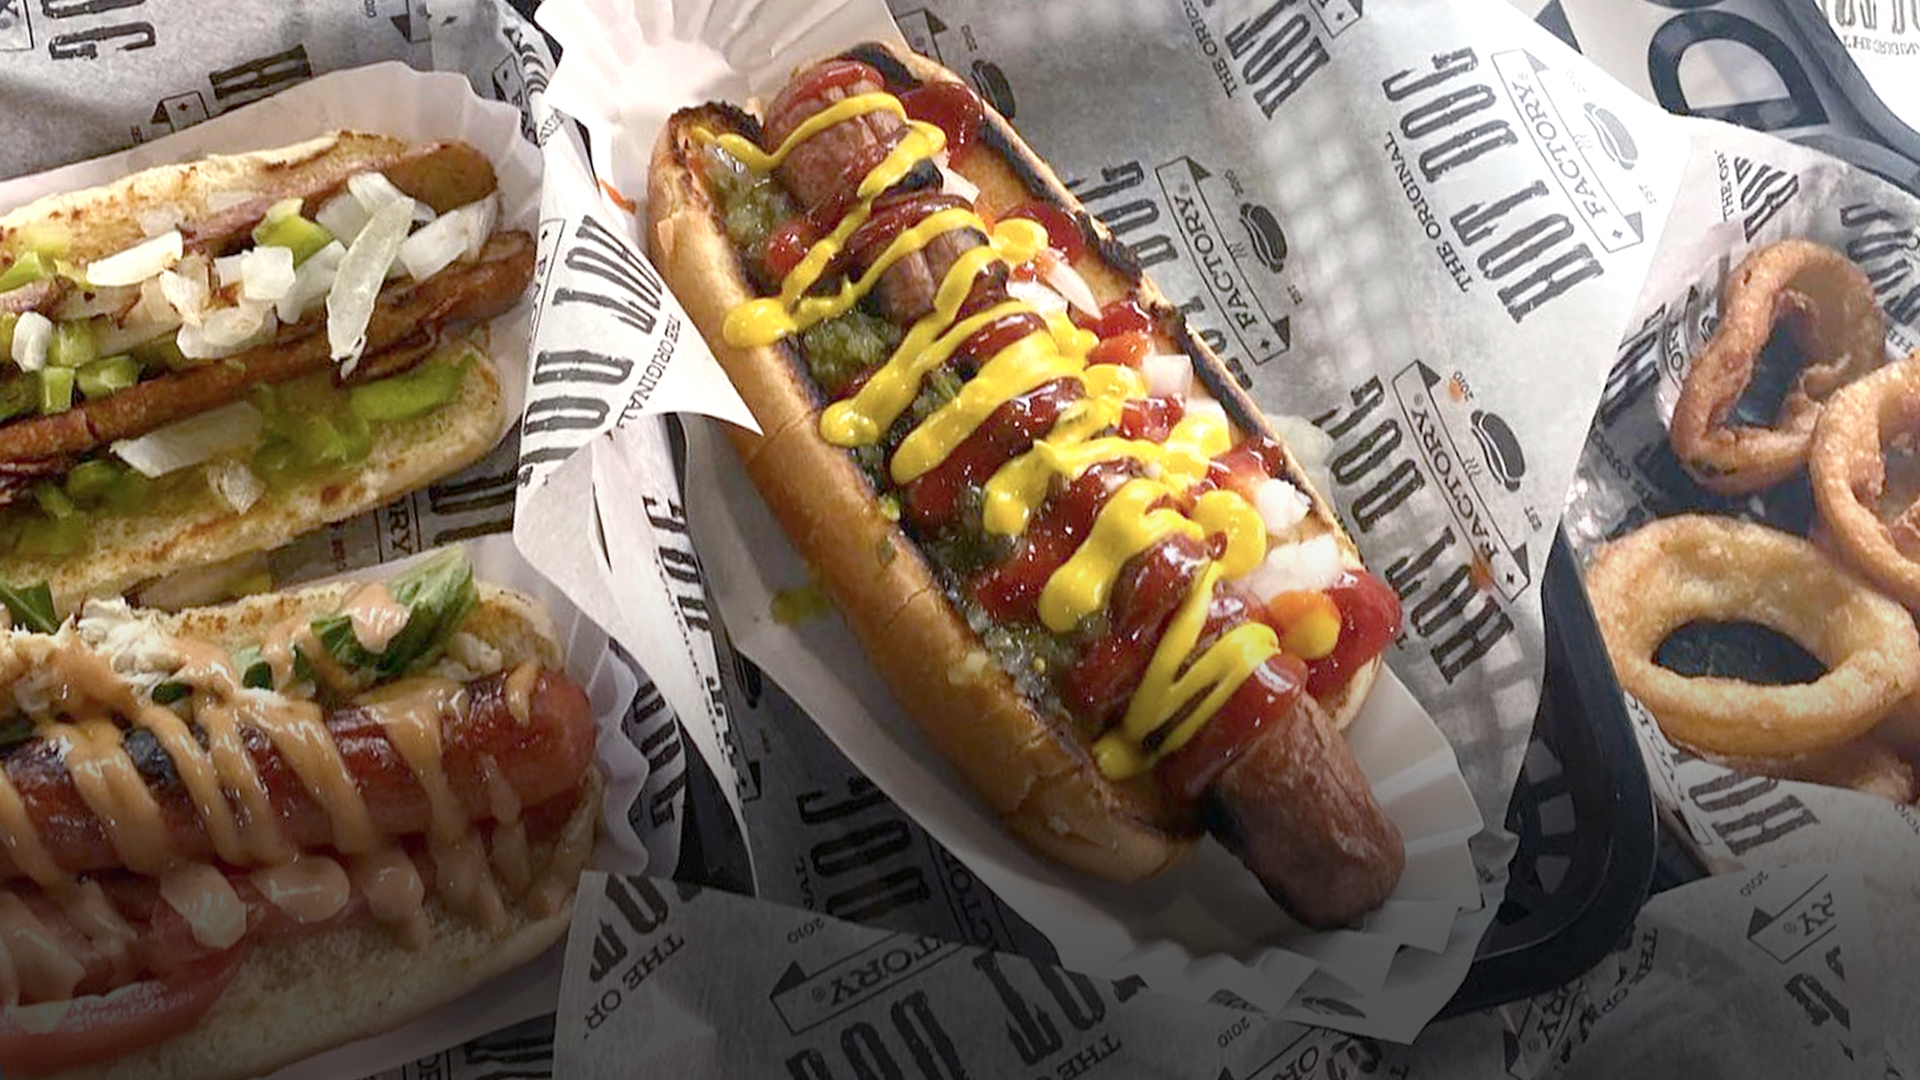 Featured in Narcity Atlanta: You Can Get Over 25 Of The Wildest Loaded Hot Dogs At This Atlanta Spot